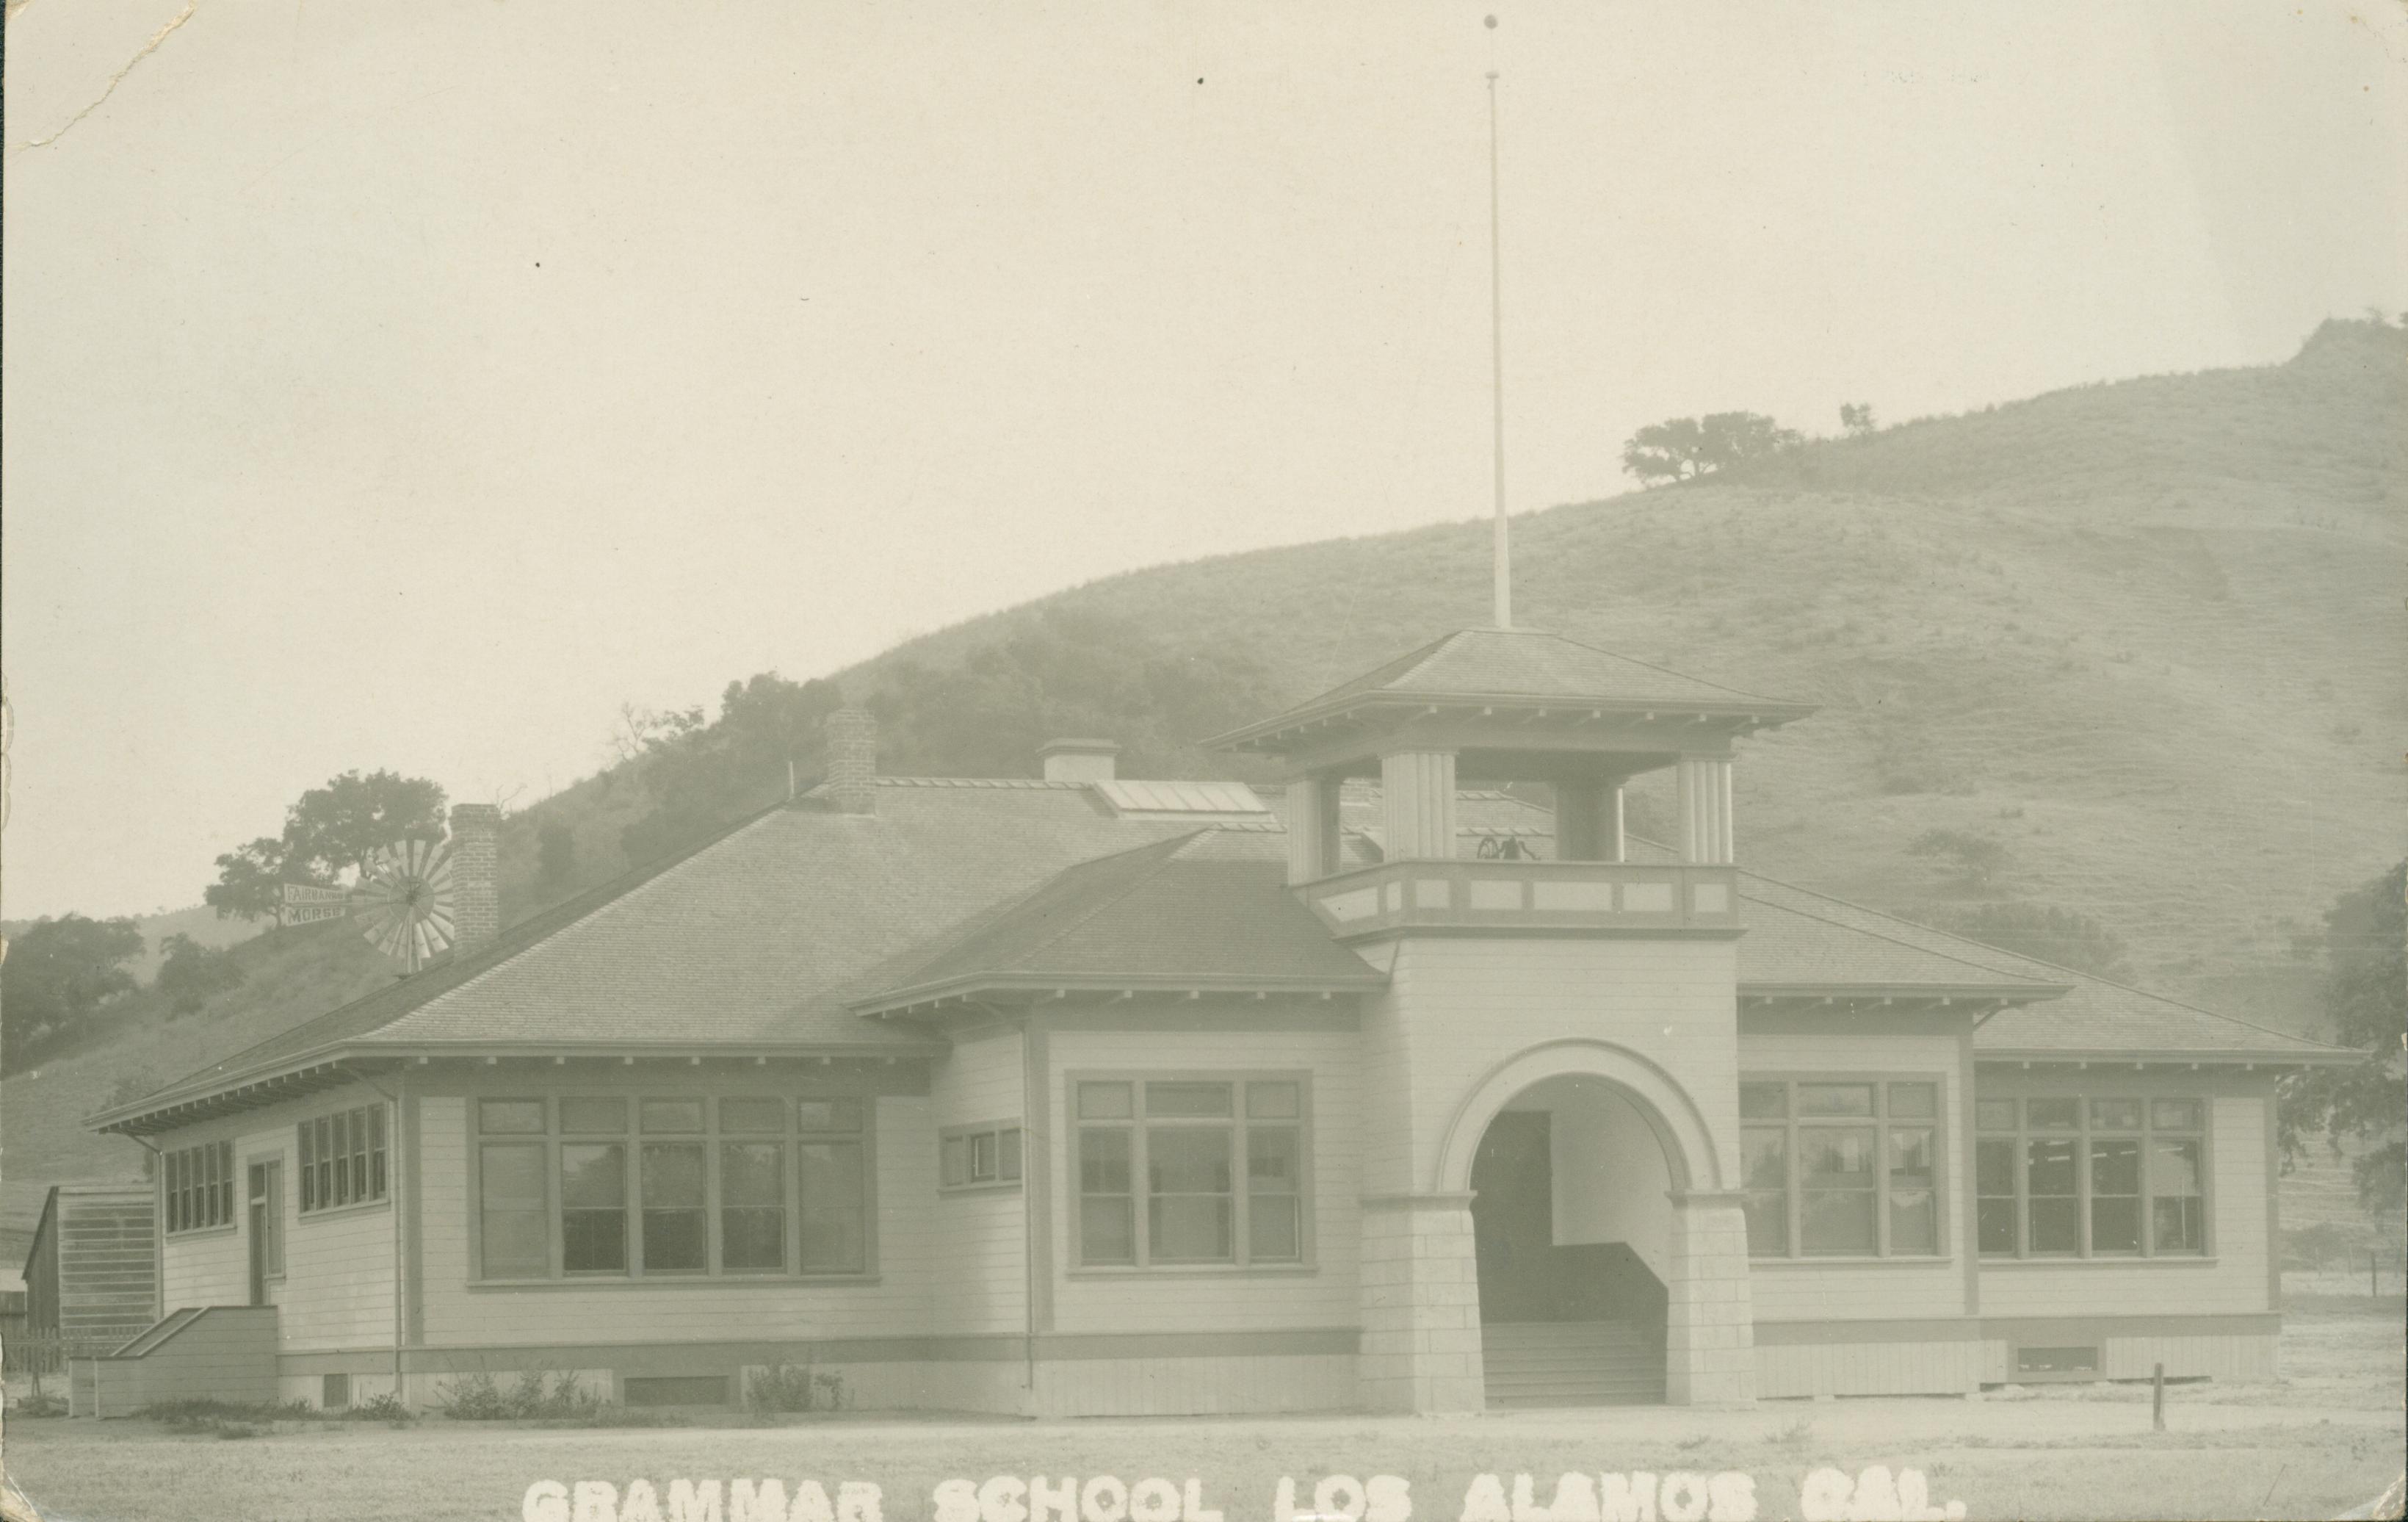 Exterior view of single story grammar school, windmill behind school, large hill with few trees behind school